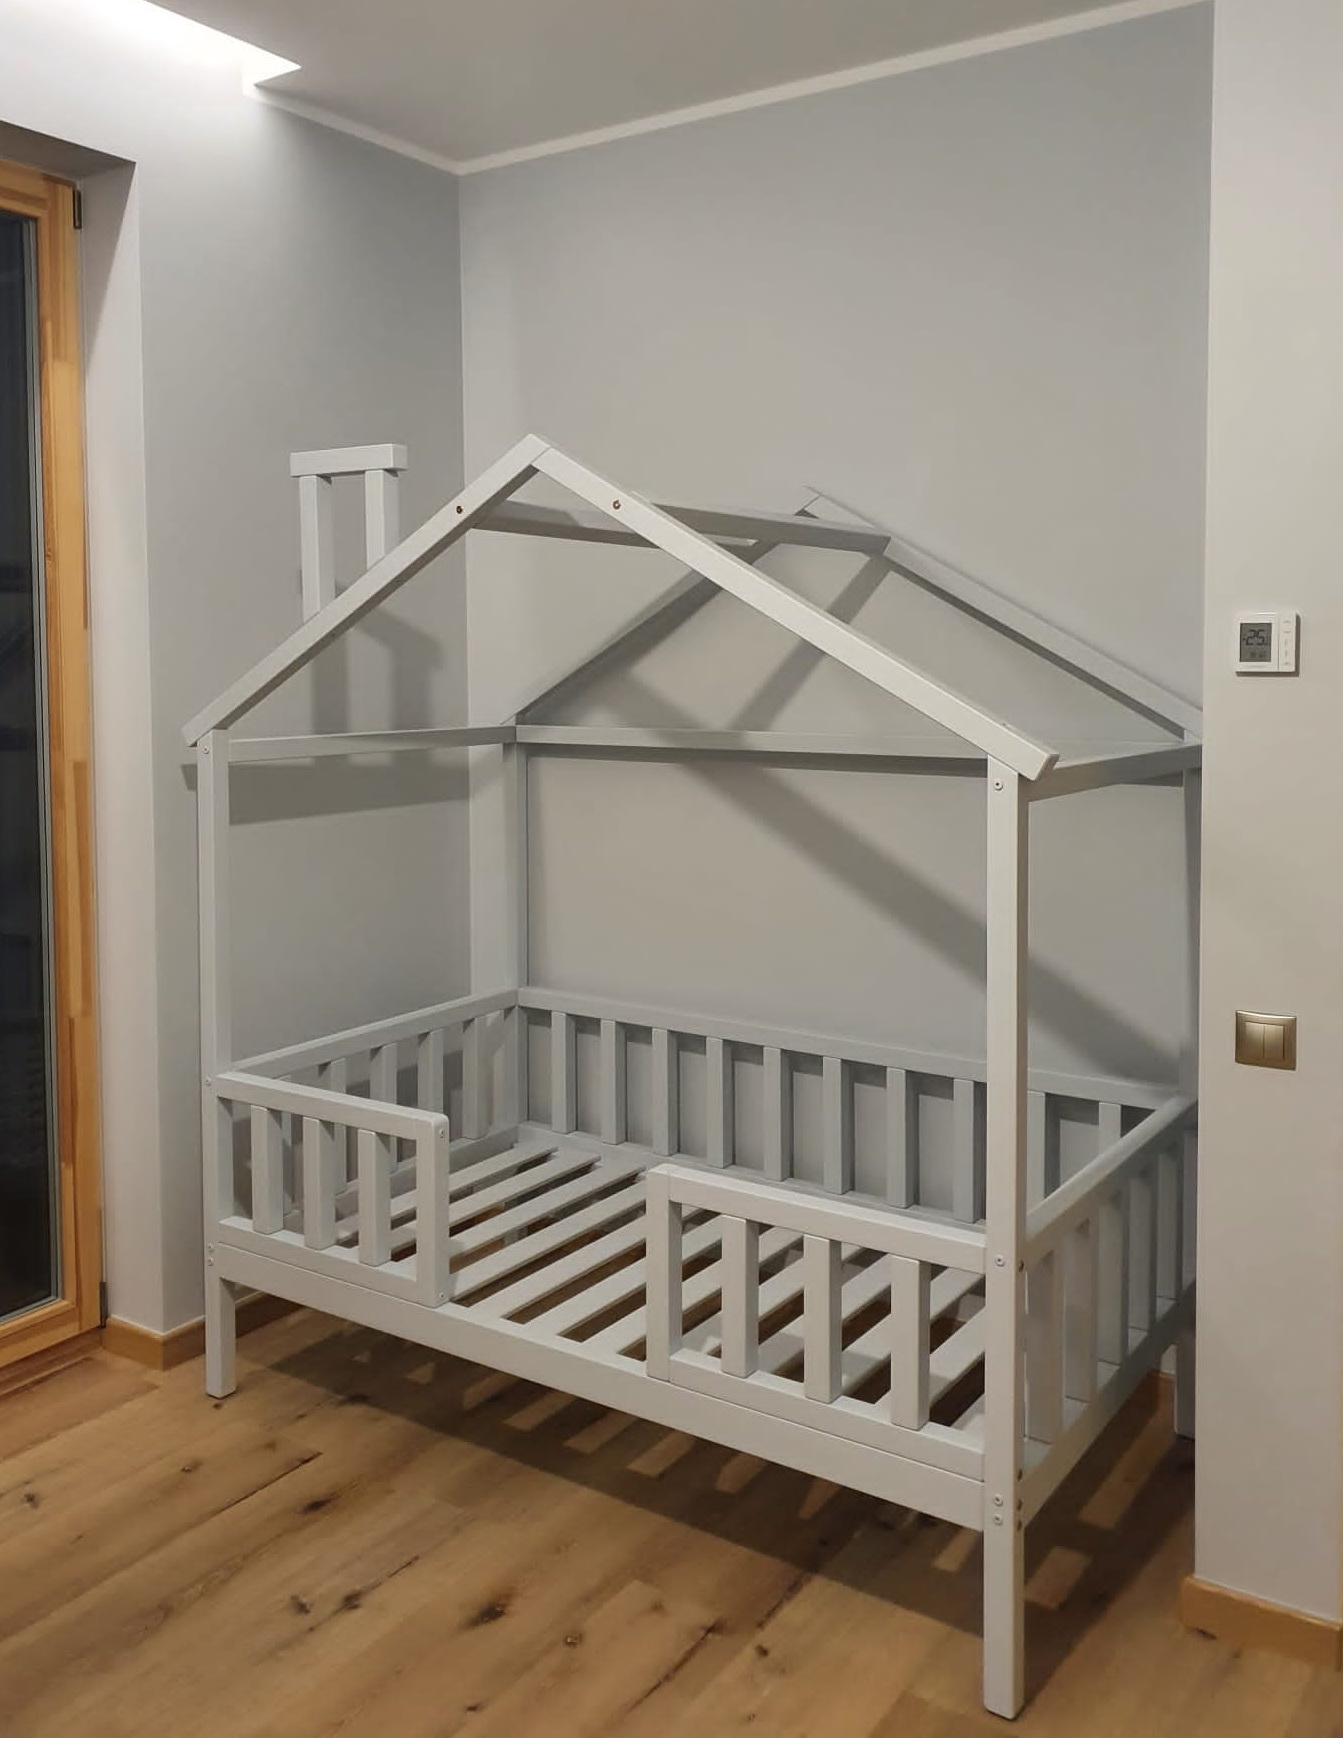 House bed for children with modern canopy. Children's bed, cottage bed, cot with roof